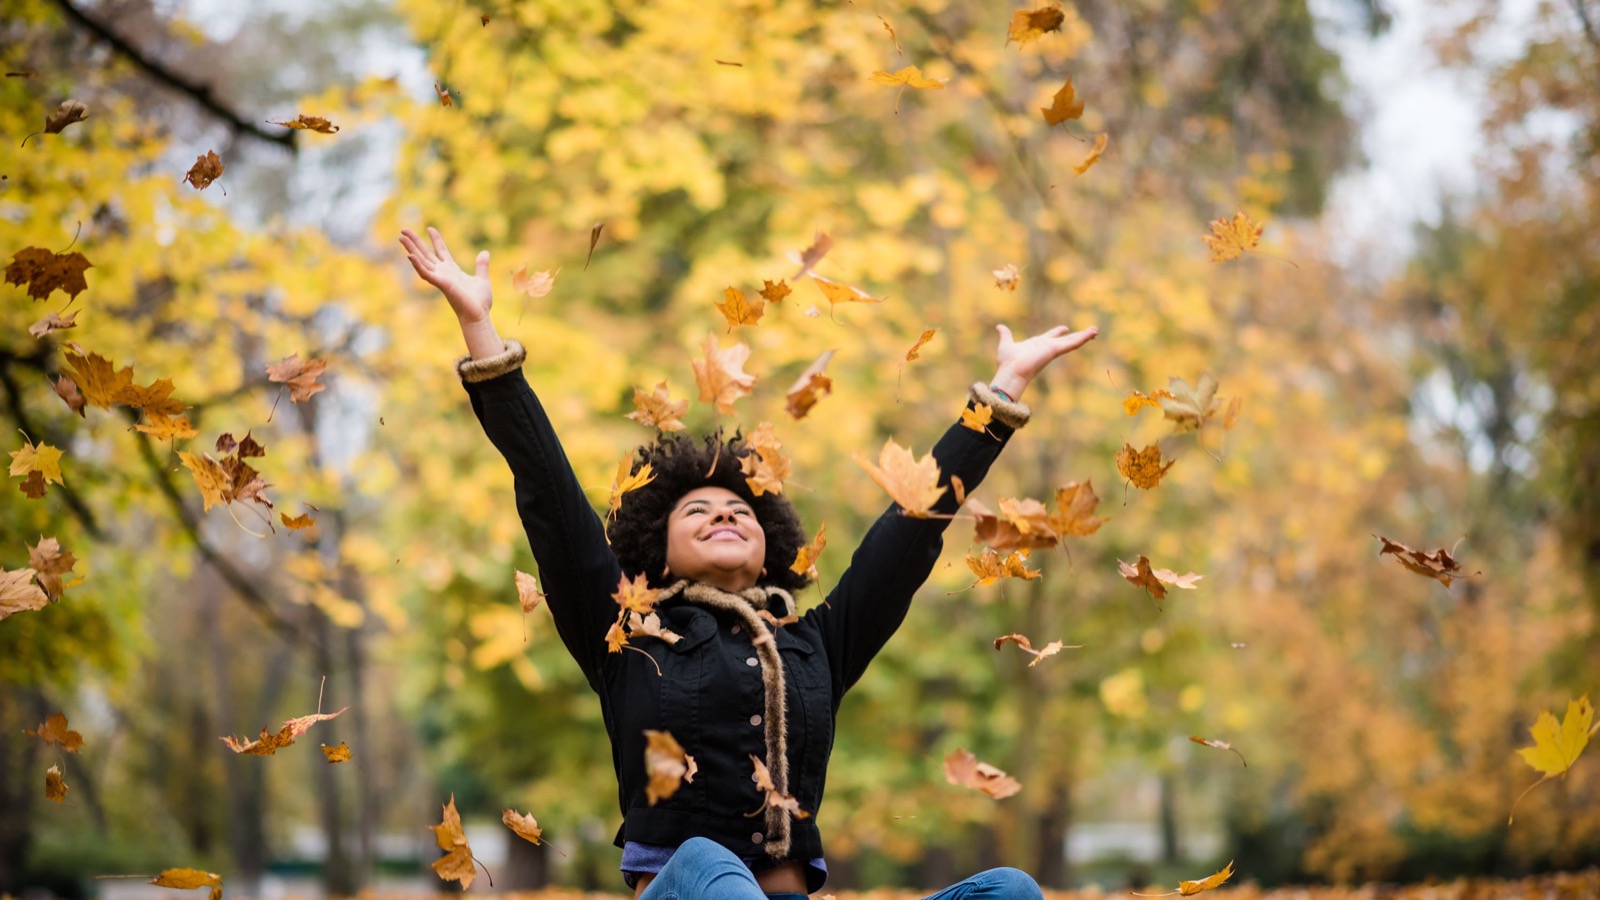 Happiness Trivia Questions And Answers Quiz Happy autumn leaves